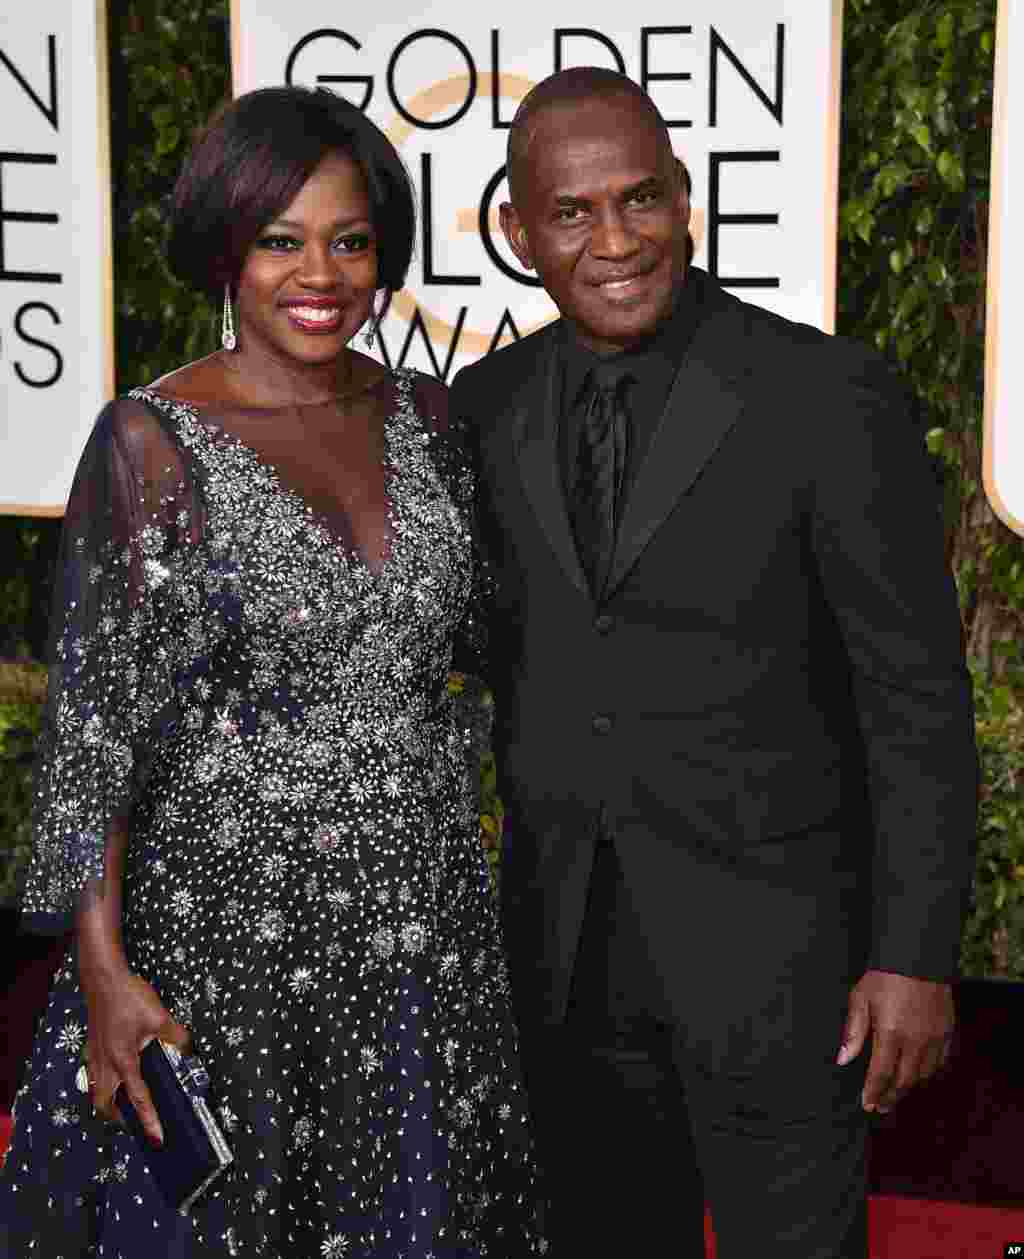 Viola Davis, left, and Julius Tennon arrive at the 73rd annual Golden Globe Awards on Jan. 10, 2016, at the Beverly Hilton Hotel in Beverly Hills, Calif. 